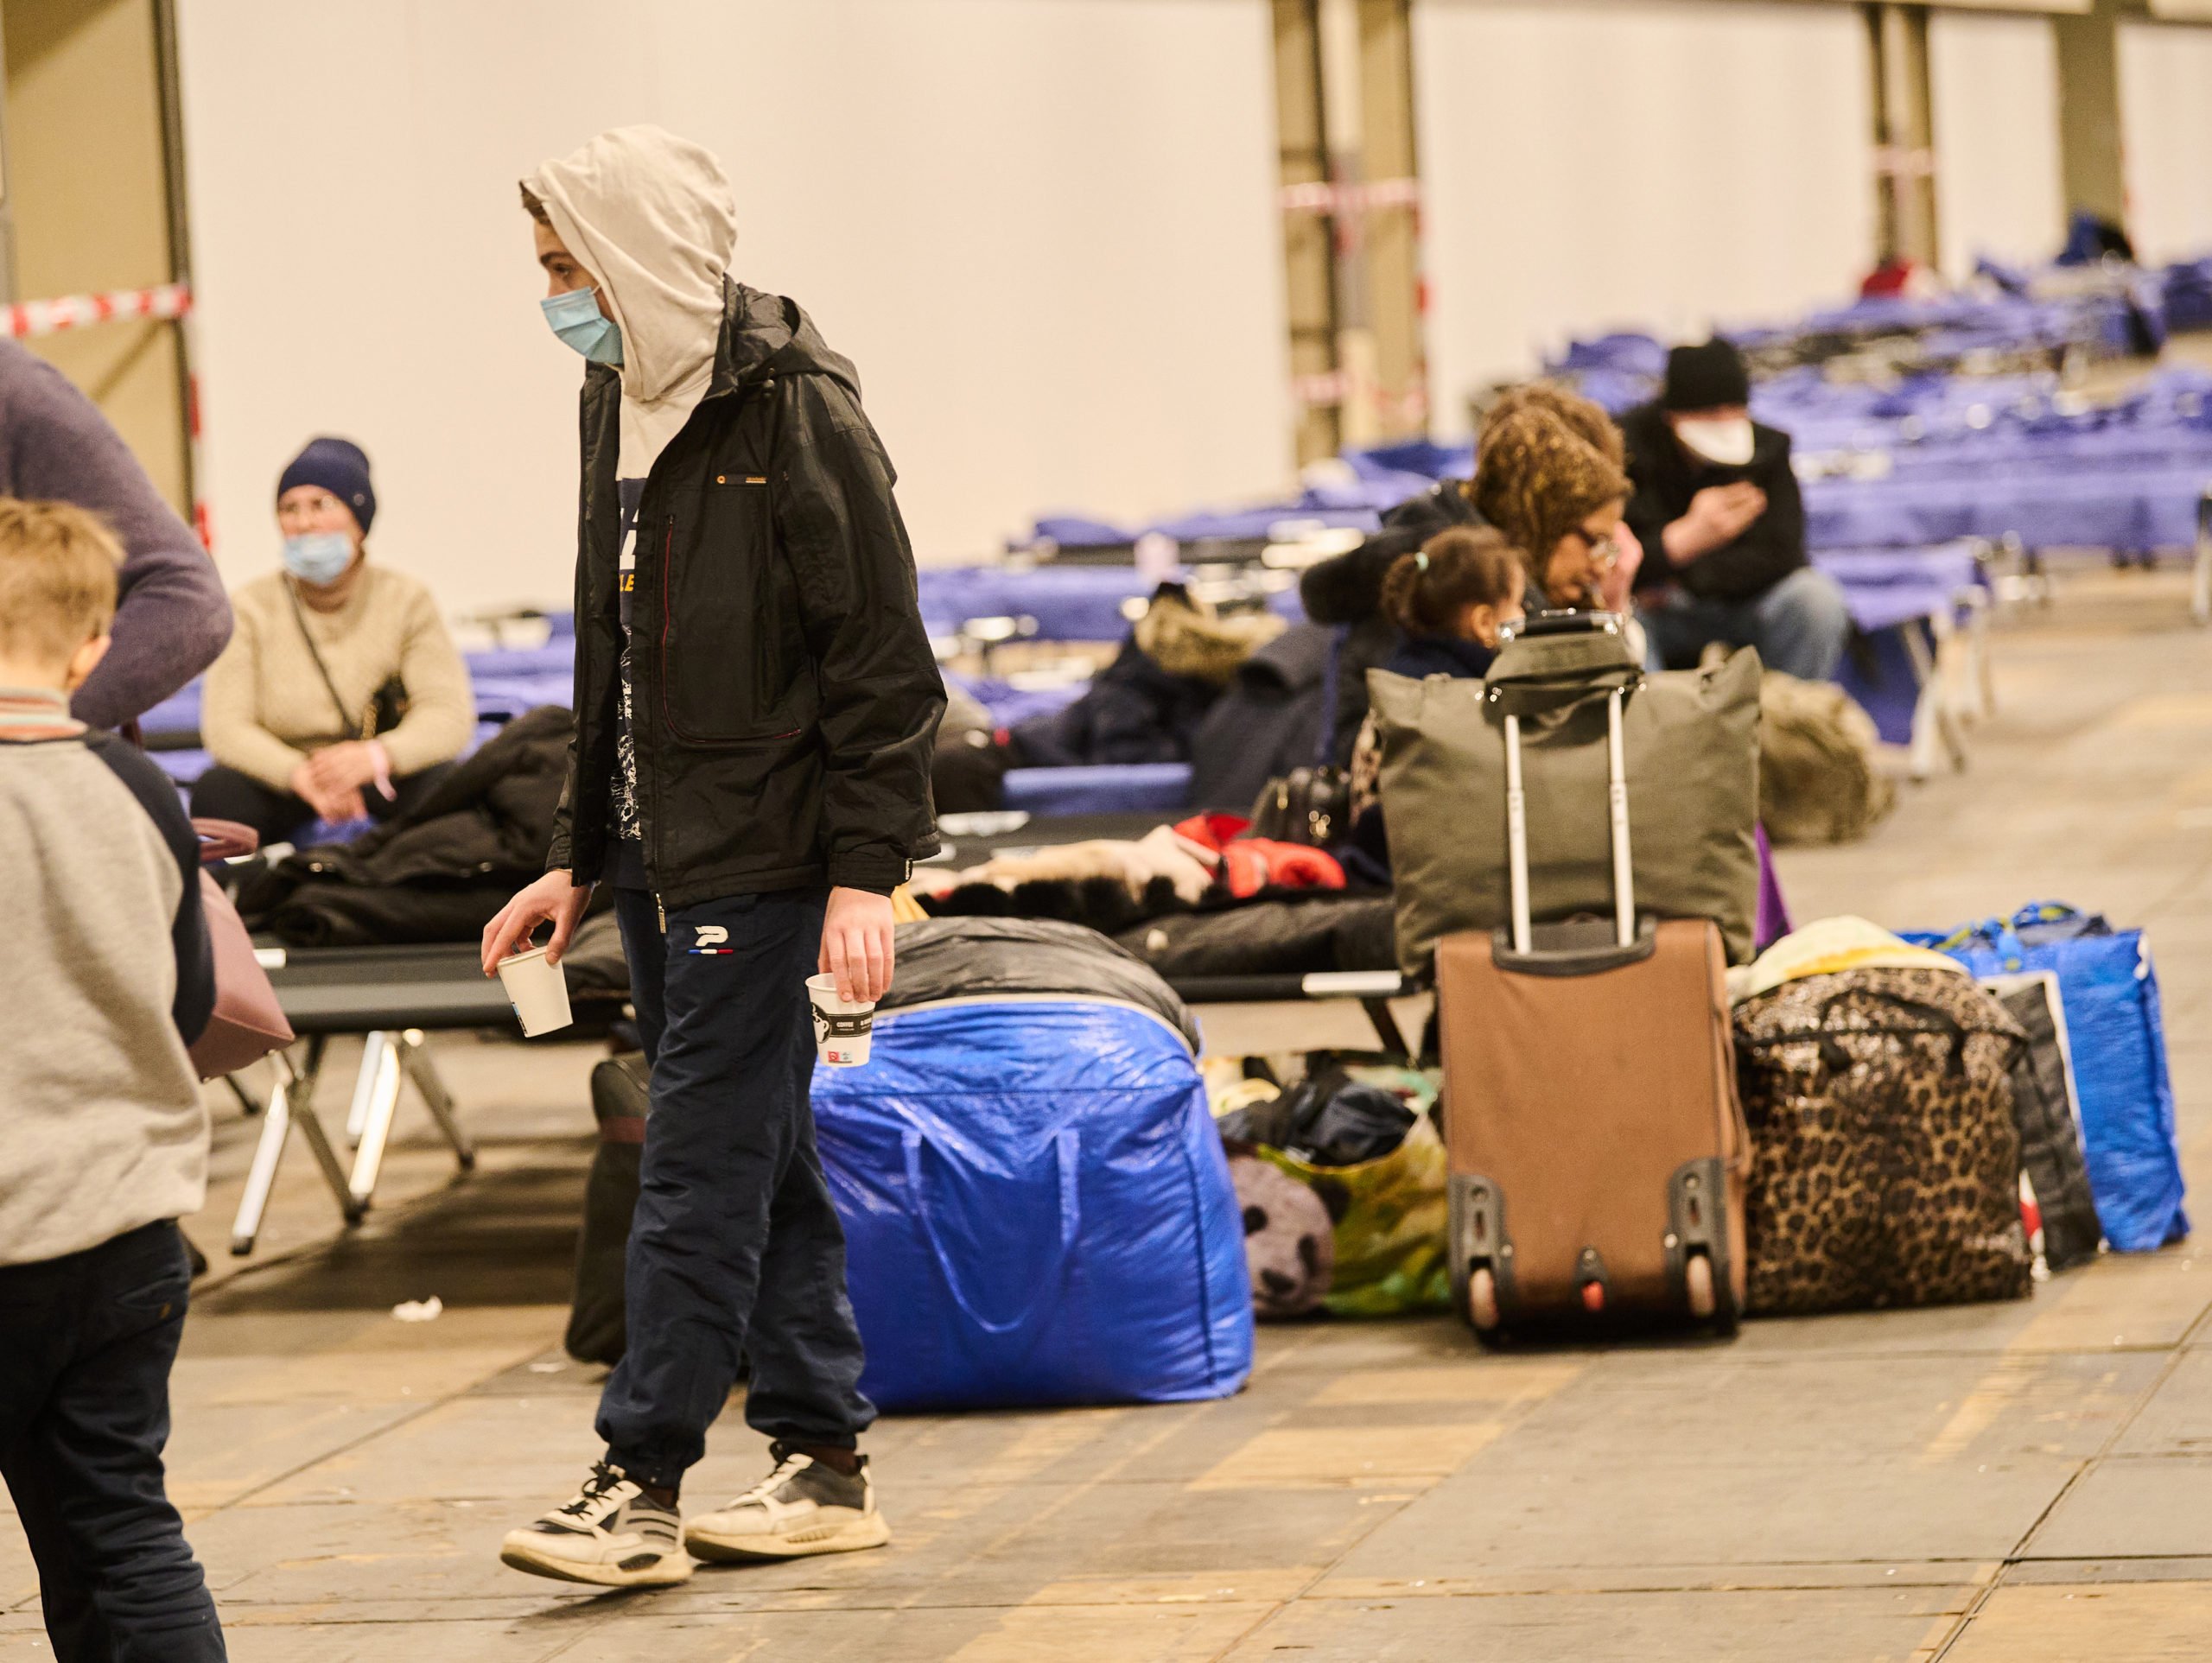 People who have fled war in Ukraine at a refugees arrival centre in Berlin.